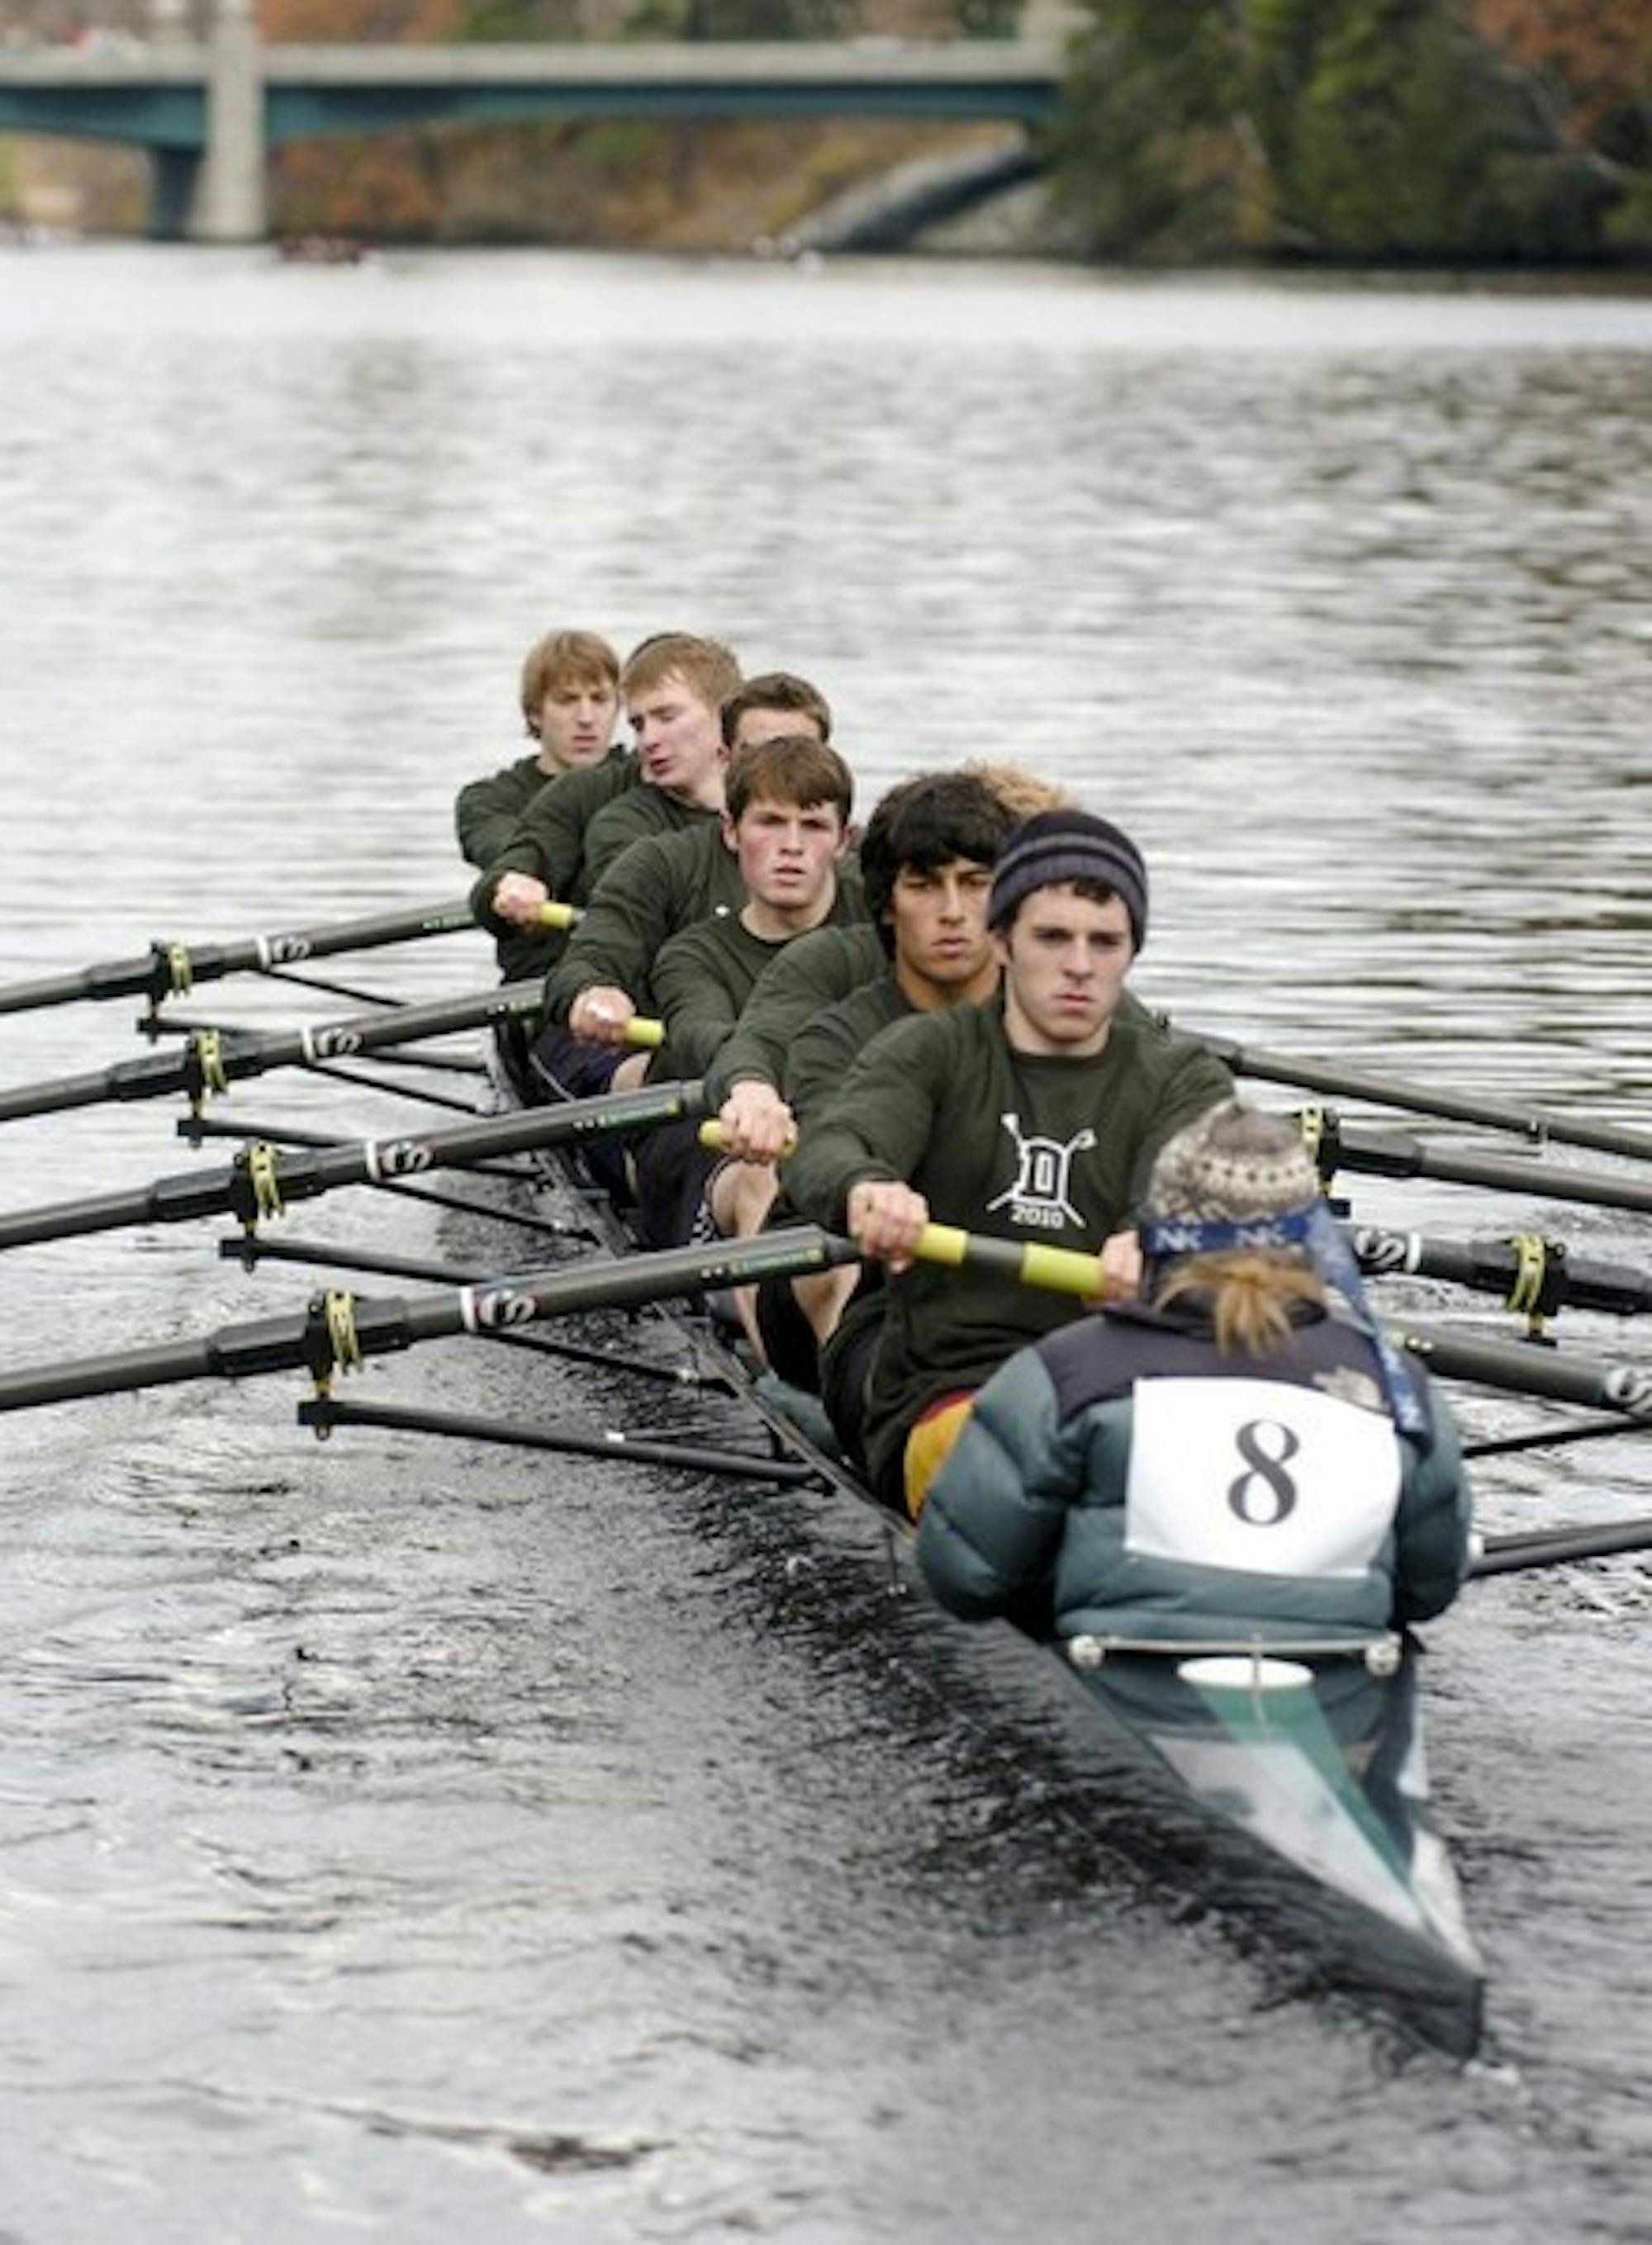 Dartmouth's lightweight rowers took first in their class on Saturday.